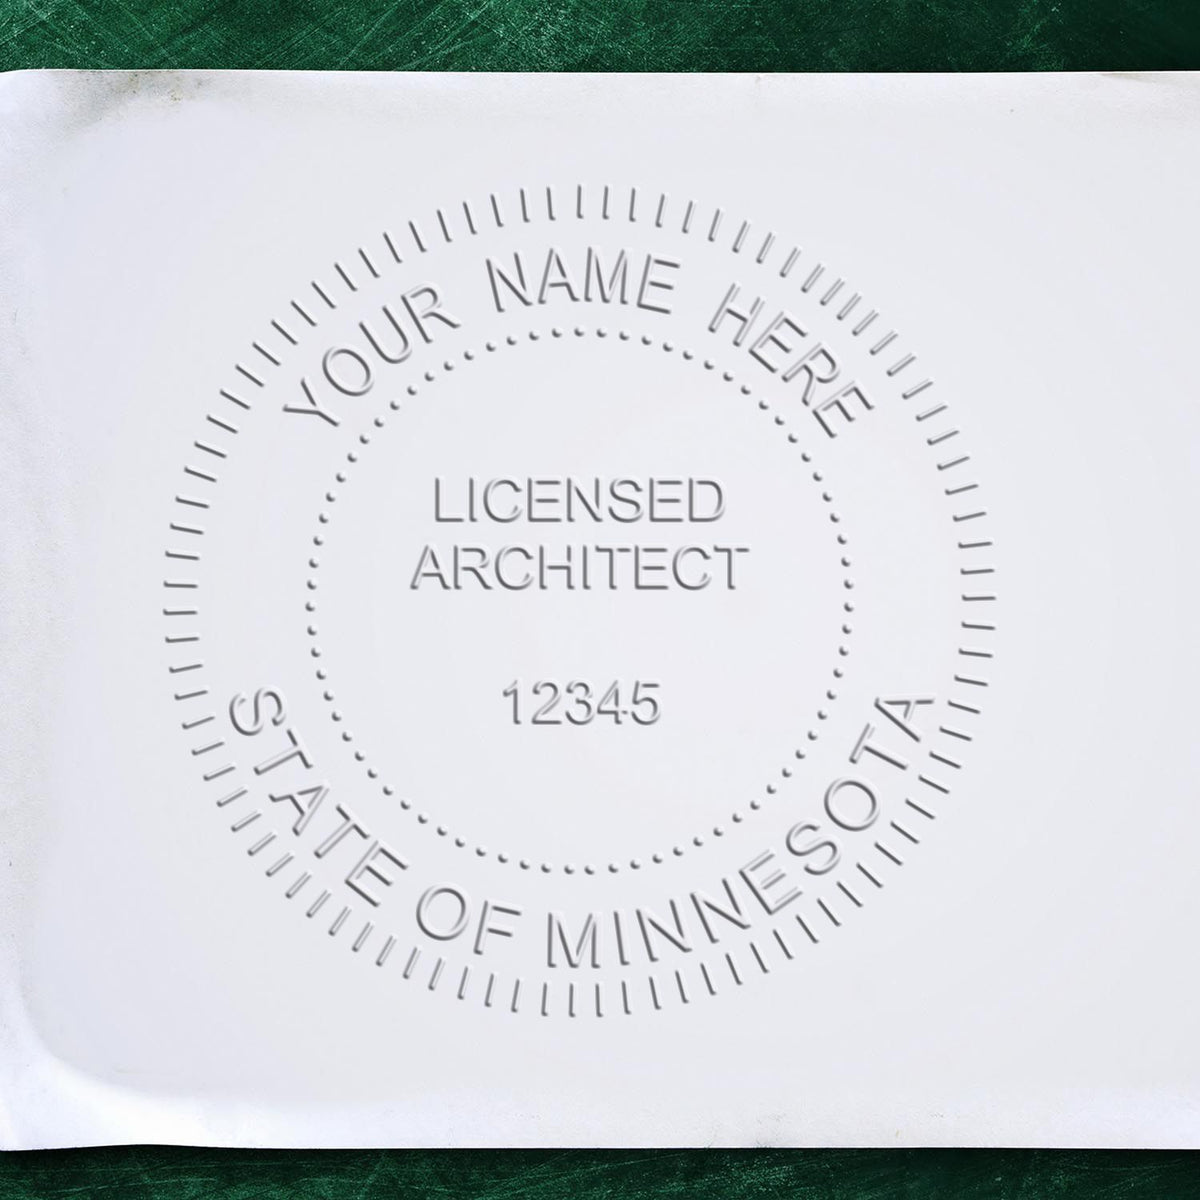 Another Example of a stamped impression of the Heavy Duty Cast Iron Minnesota Architect Embosser on a piece of office paper.